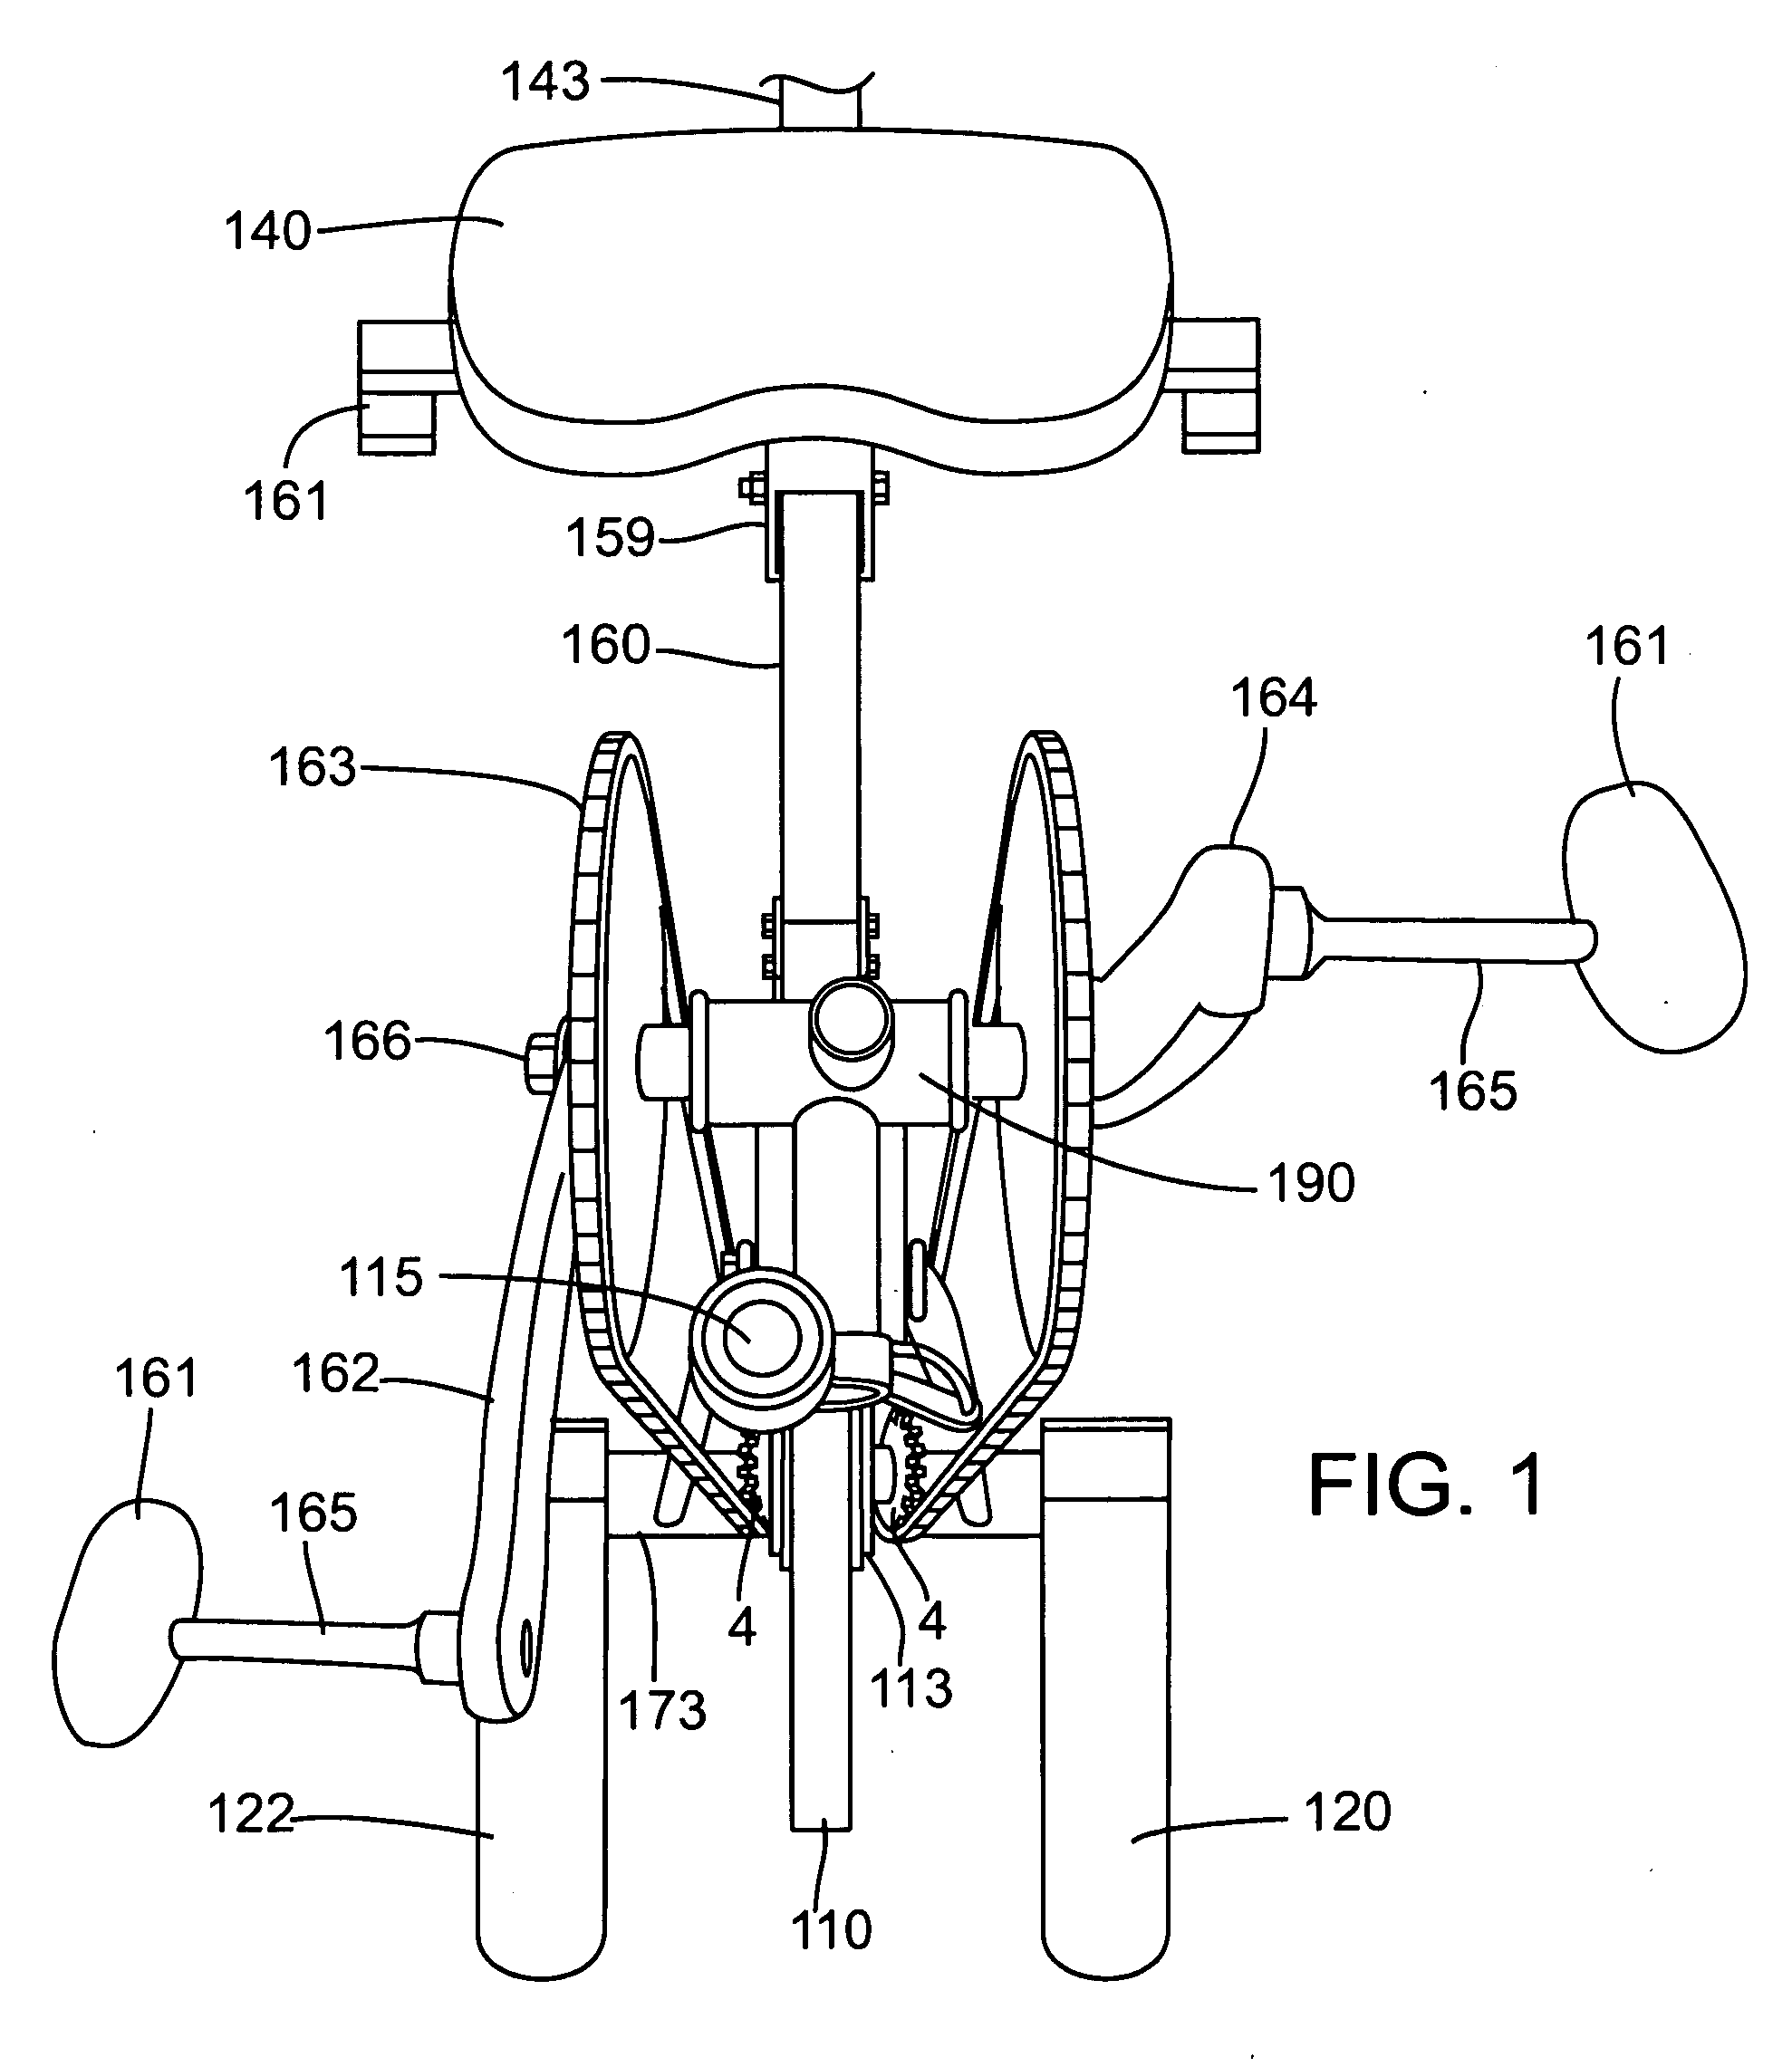 Bicycling exercise apparatus